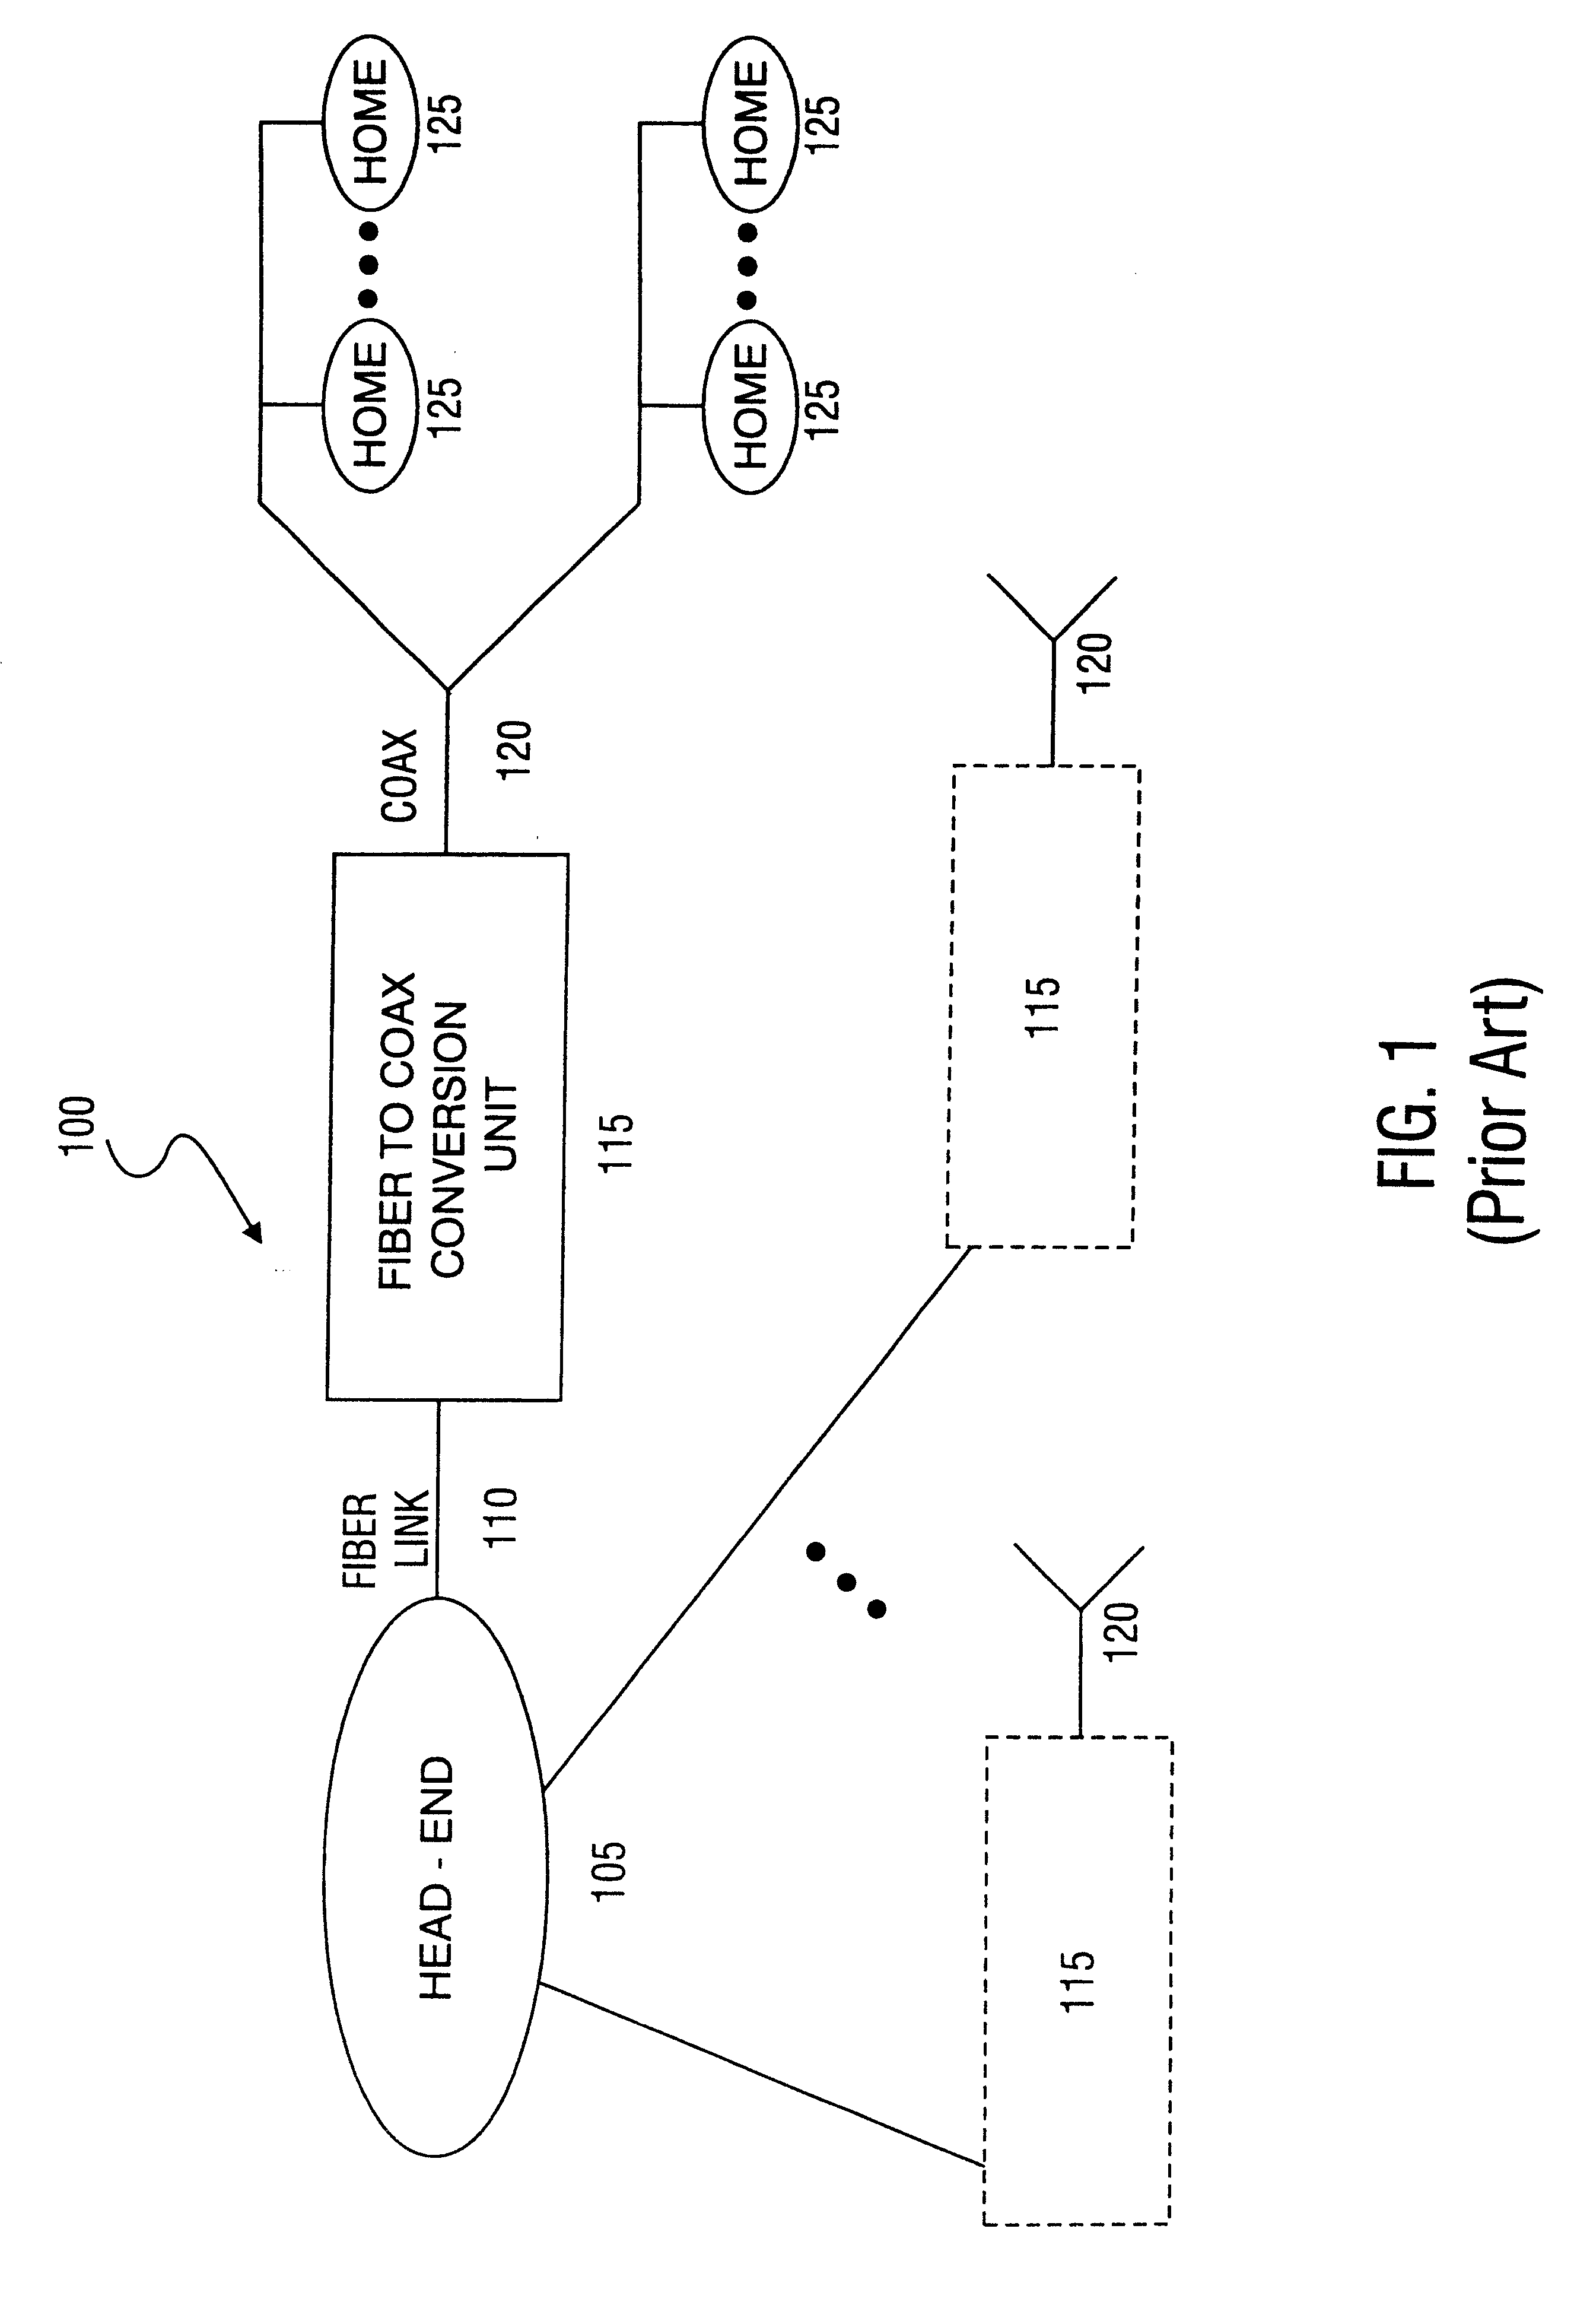 Method for providing integrated packet services over a shared-media network